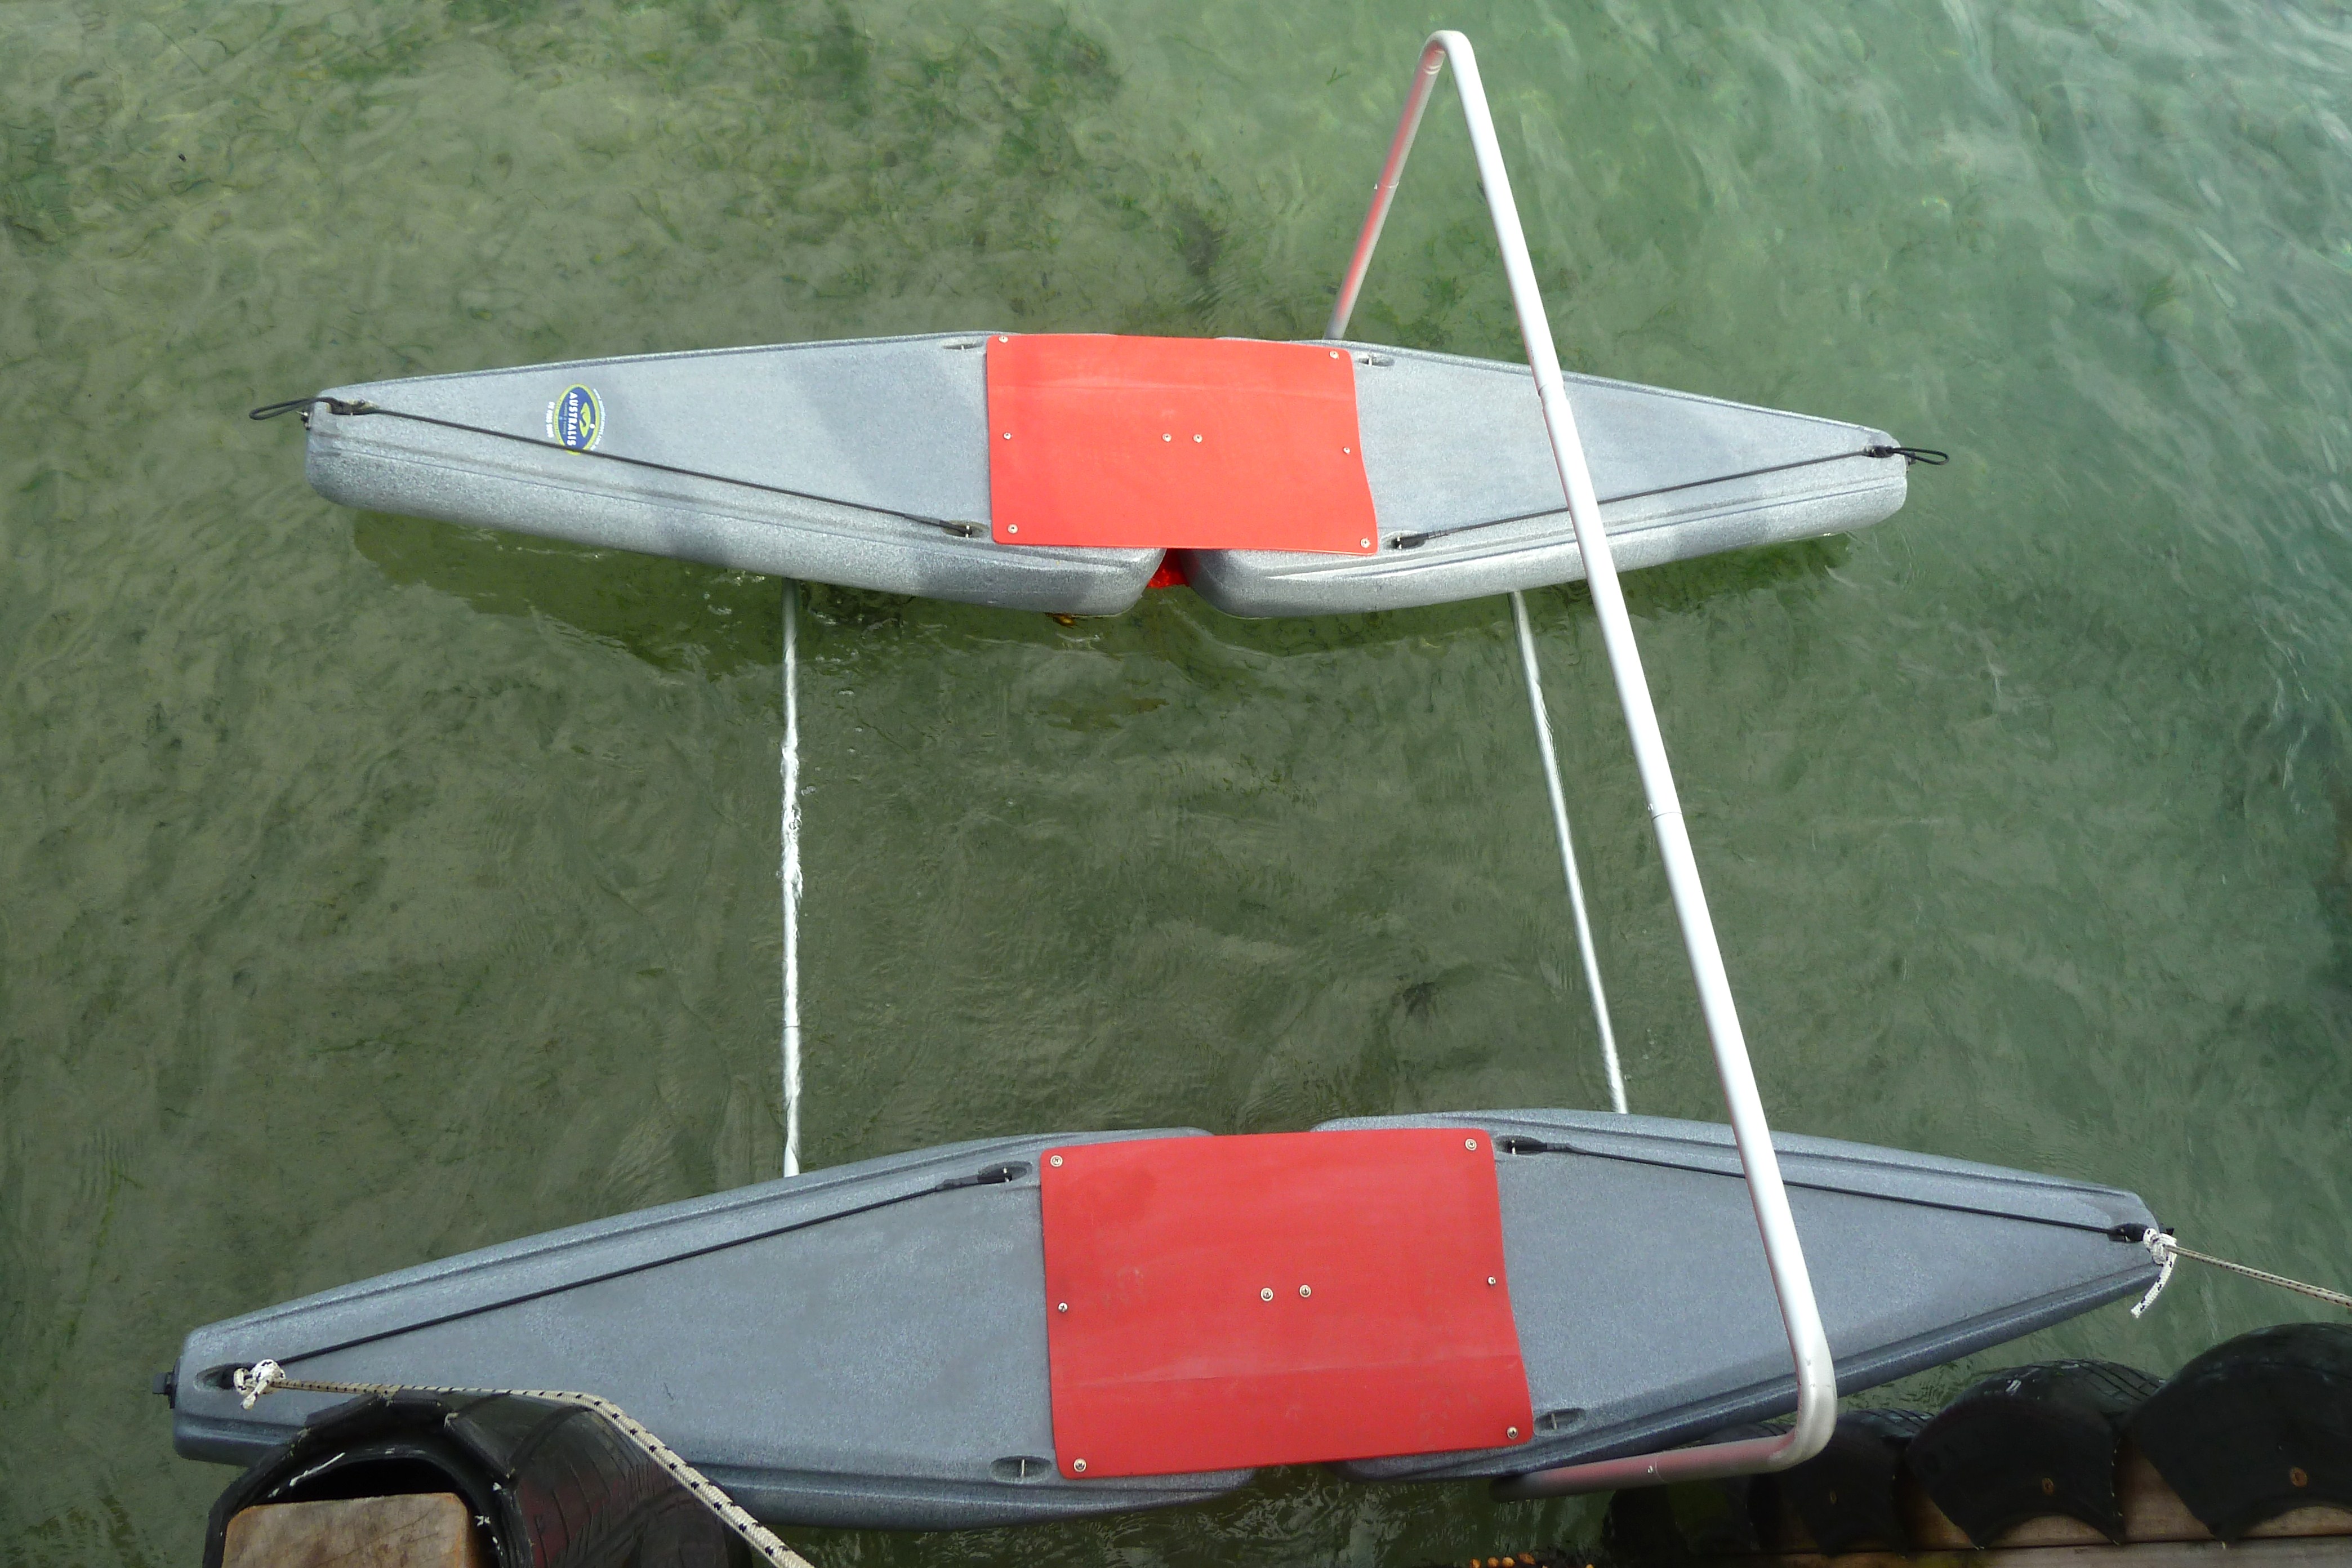 Floating Kayak Dock System For Launching Kayaks And Canoes